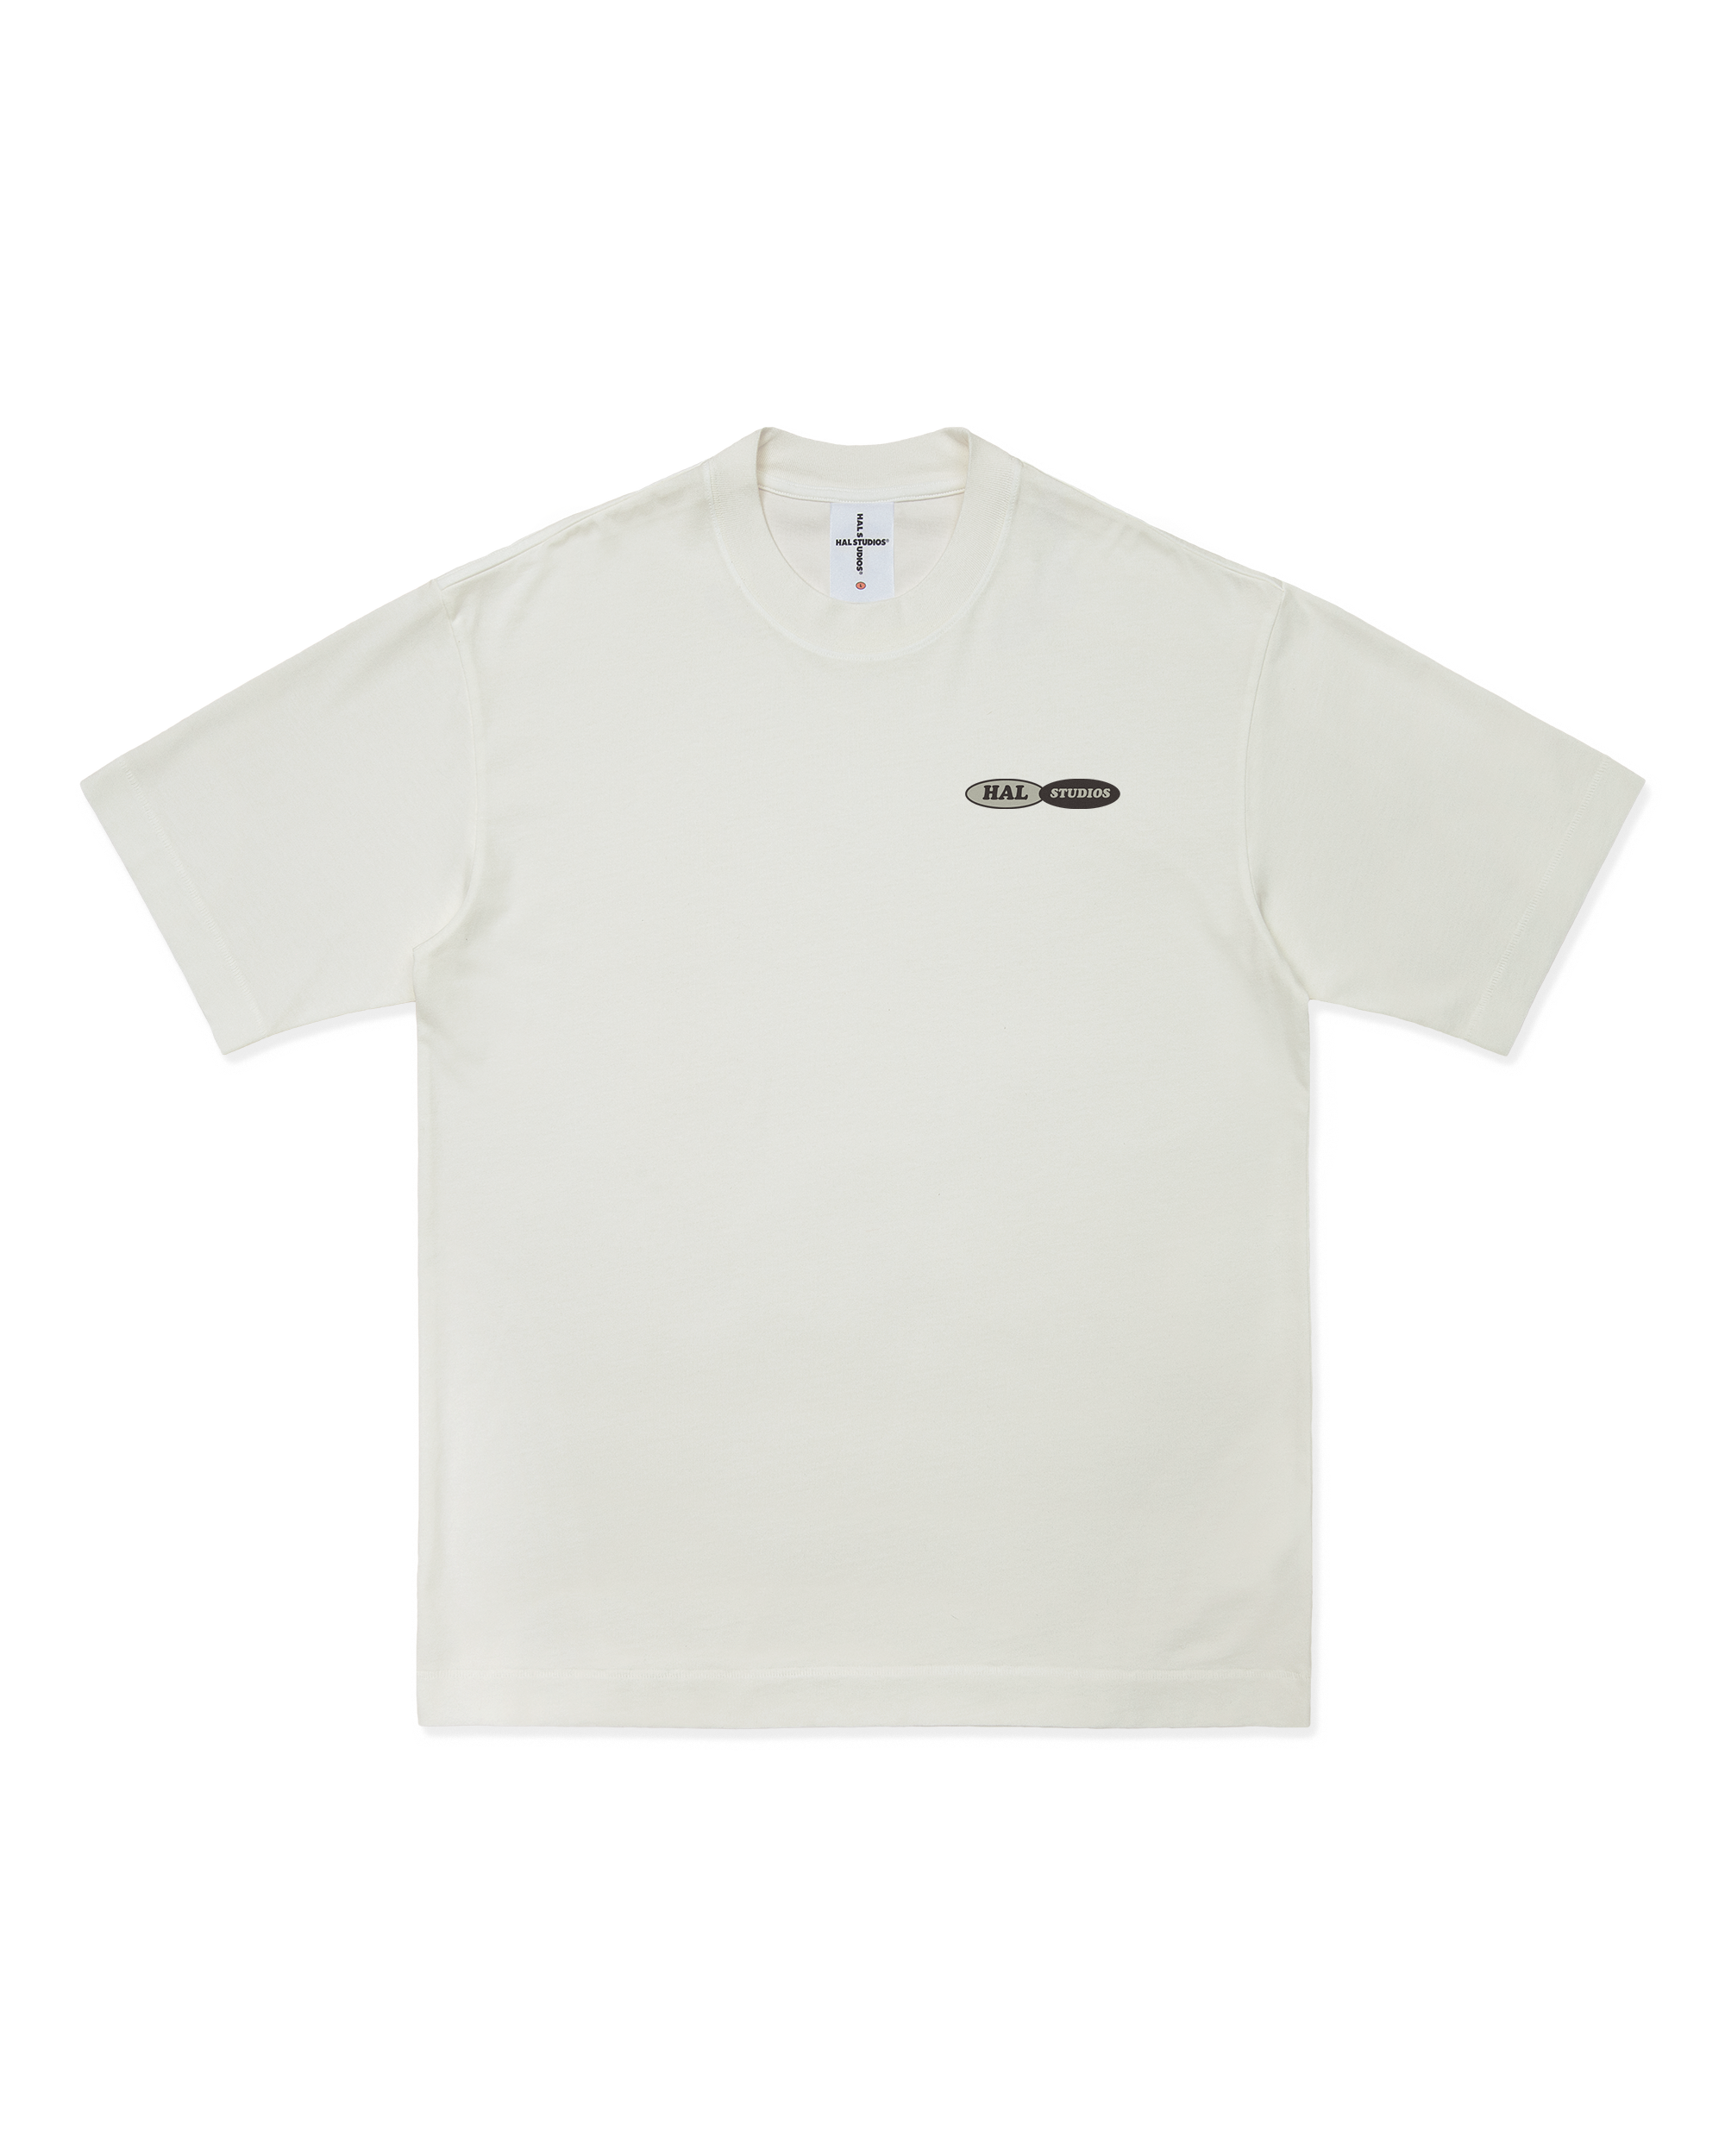 A HAL STUDIOS JOINT T-SHIRT - OFF-WHITE